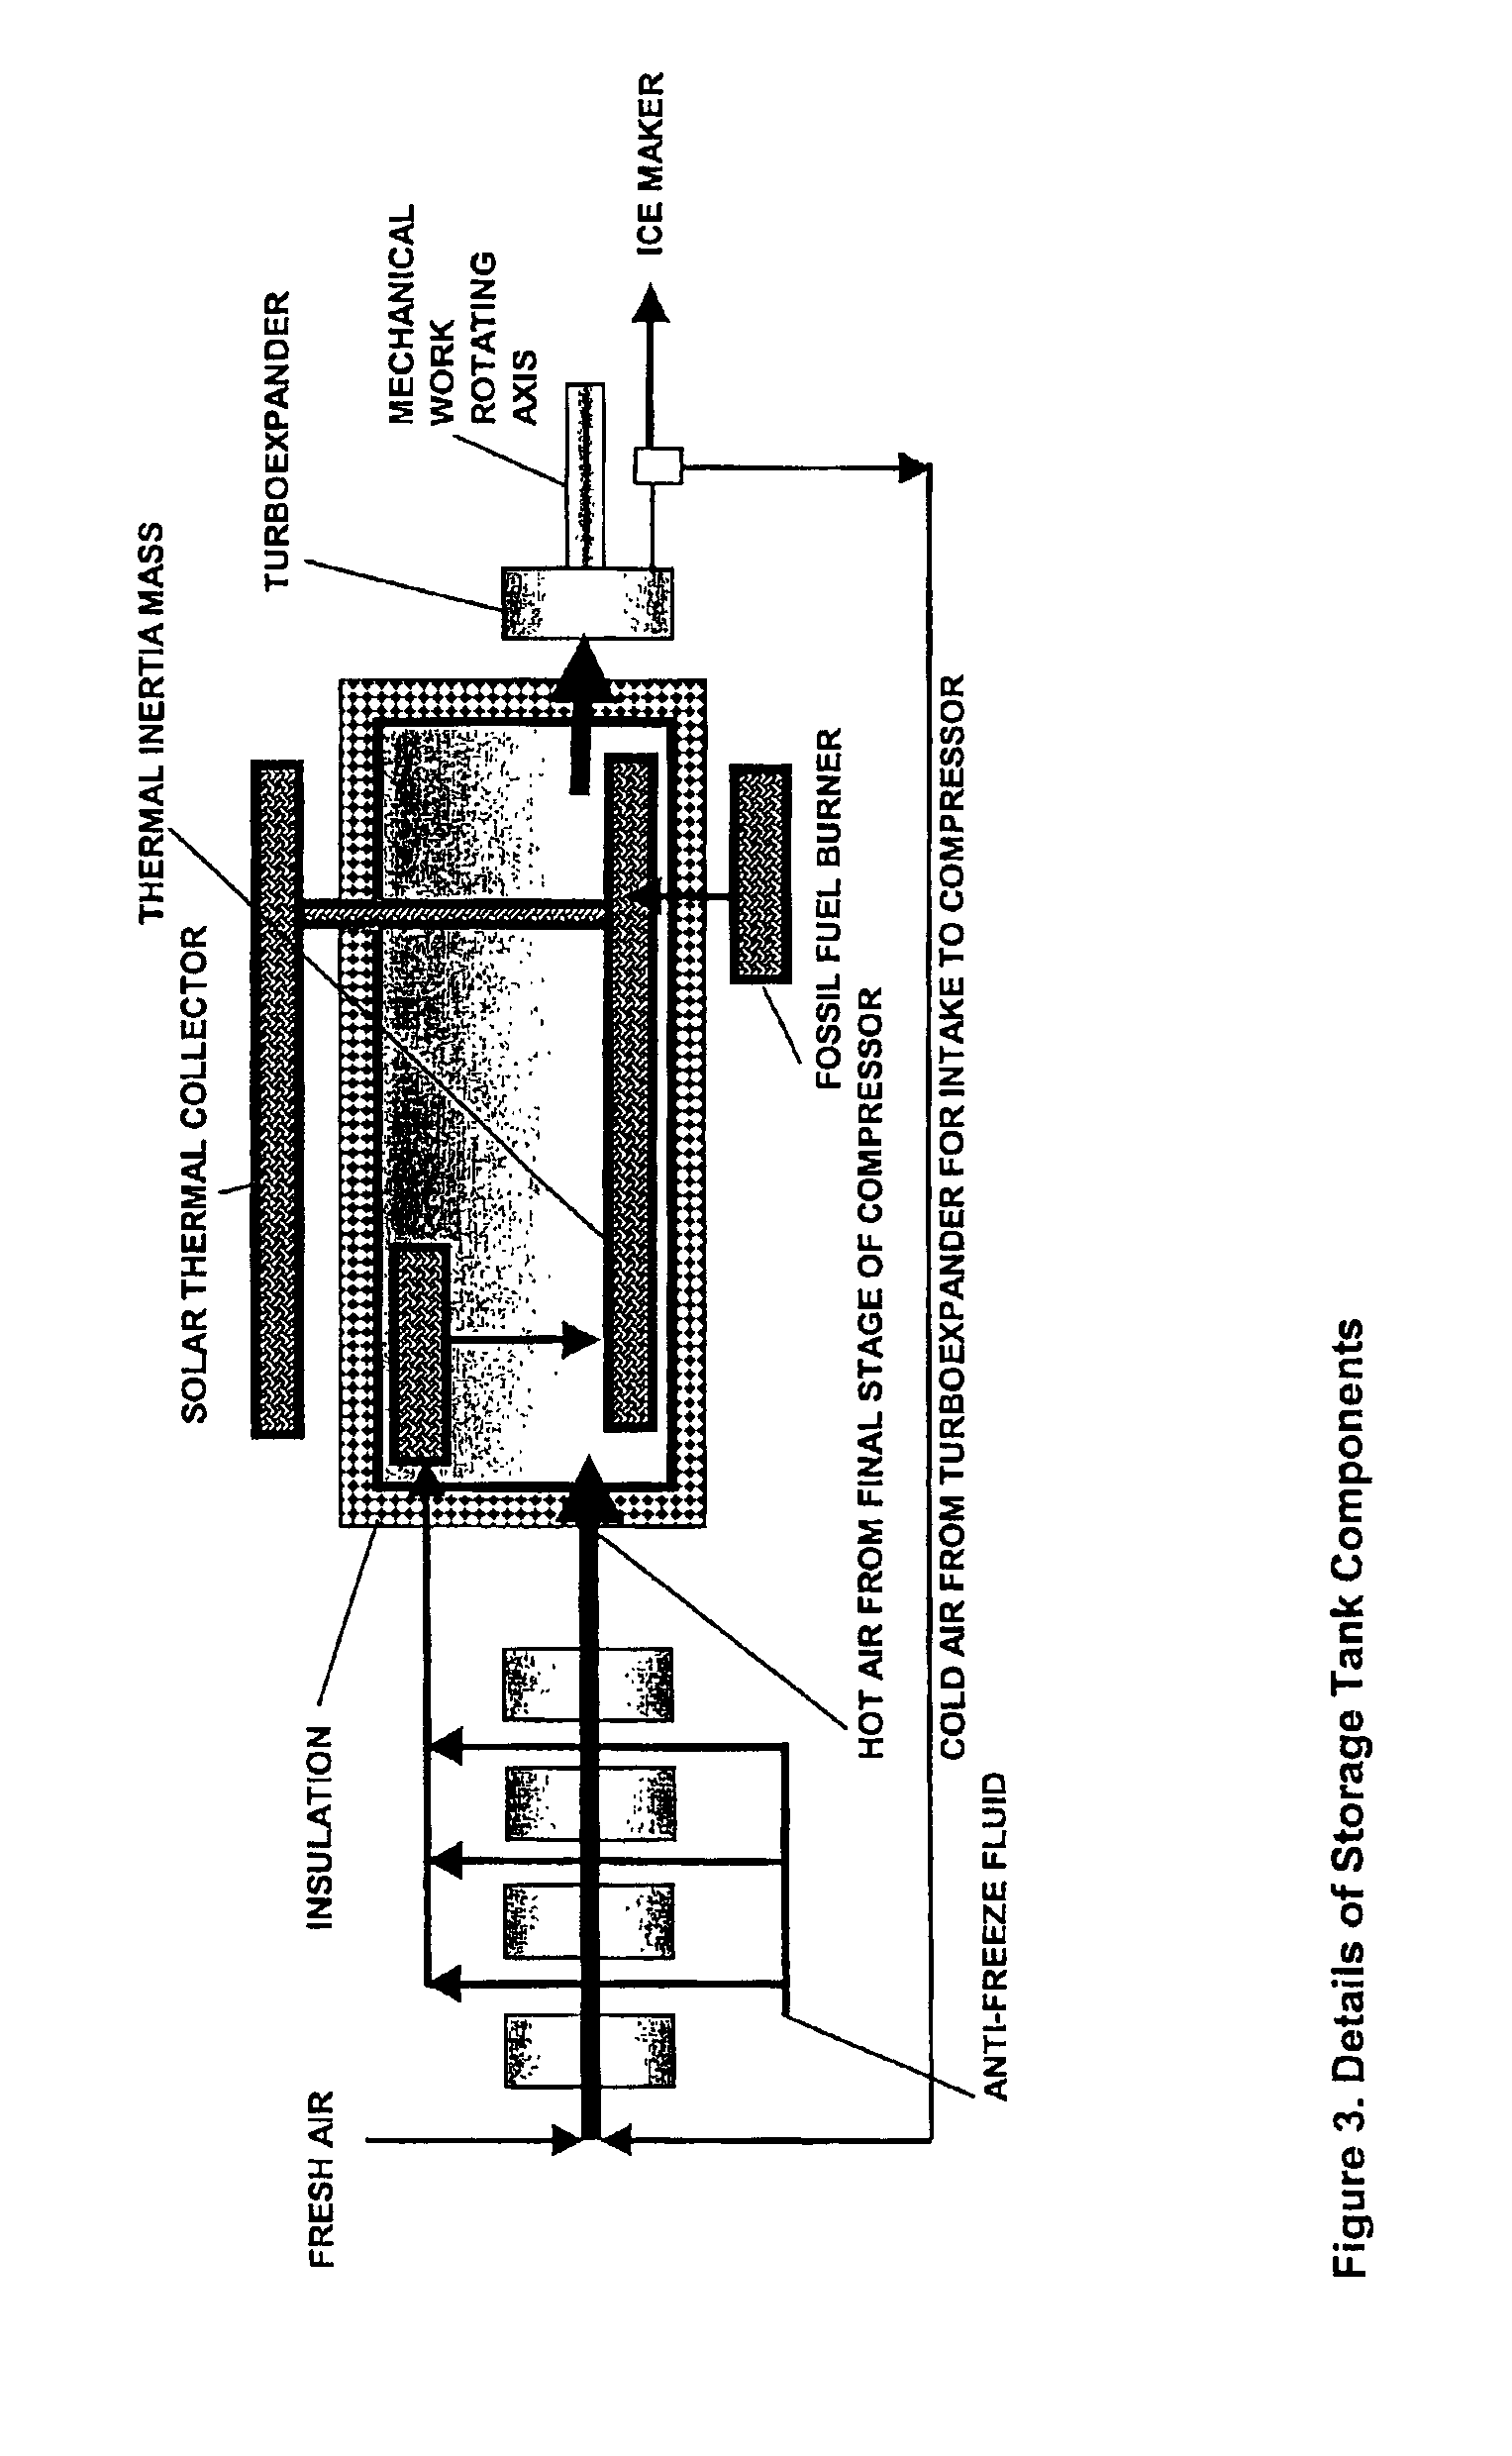 Method and apparatus for using wind turbines to generate and supply uninterrupted power to locations remote from the power grid